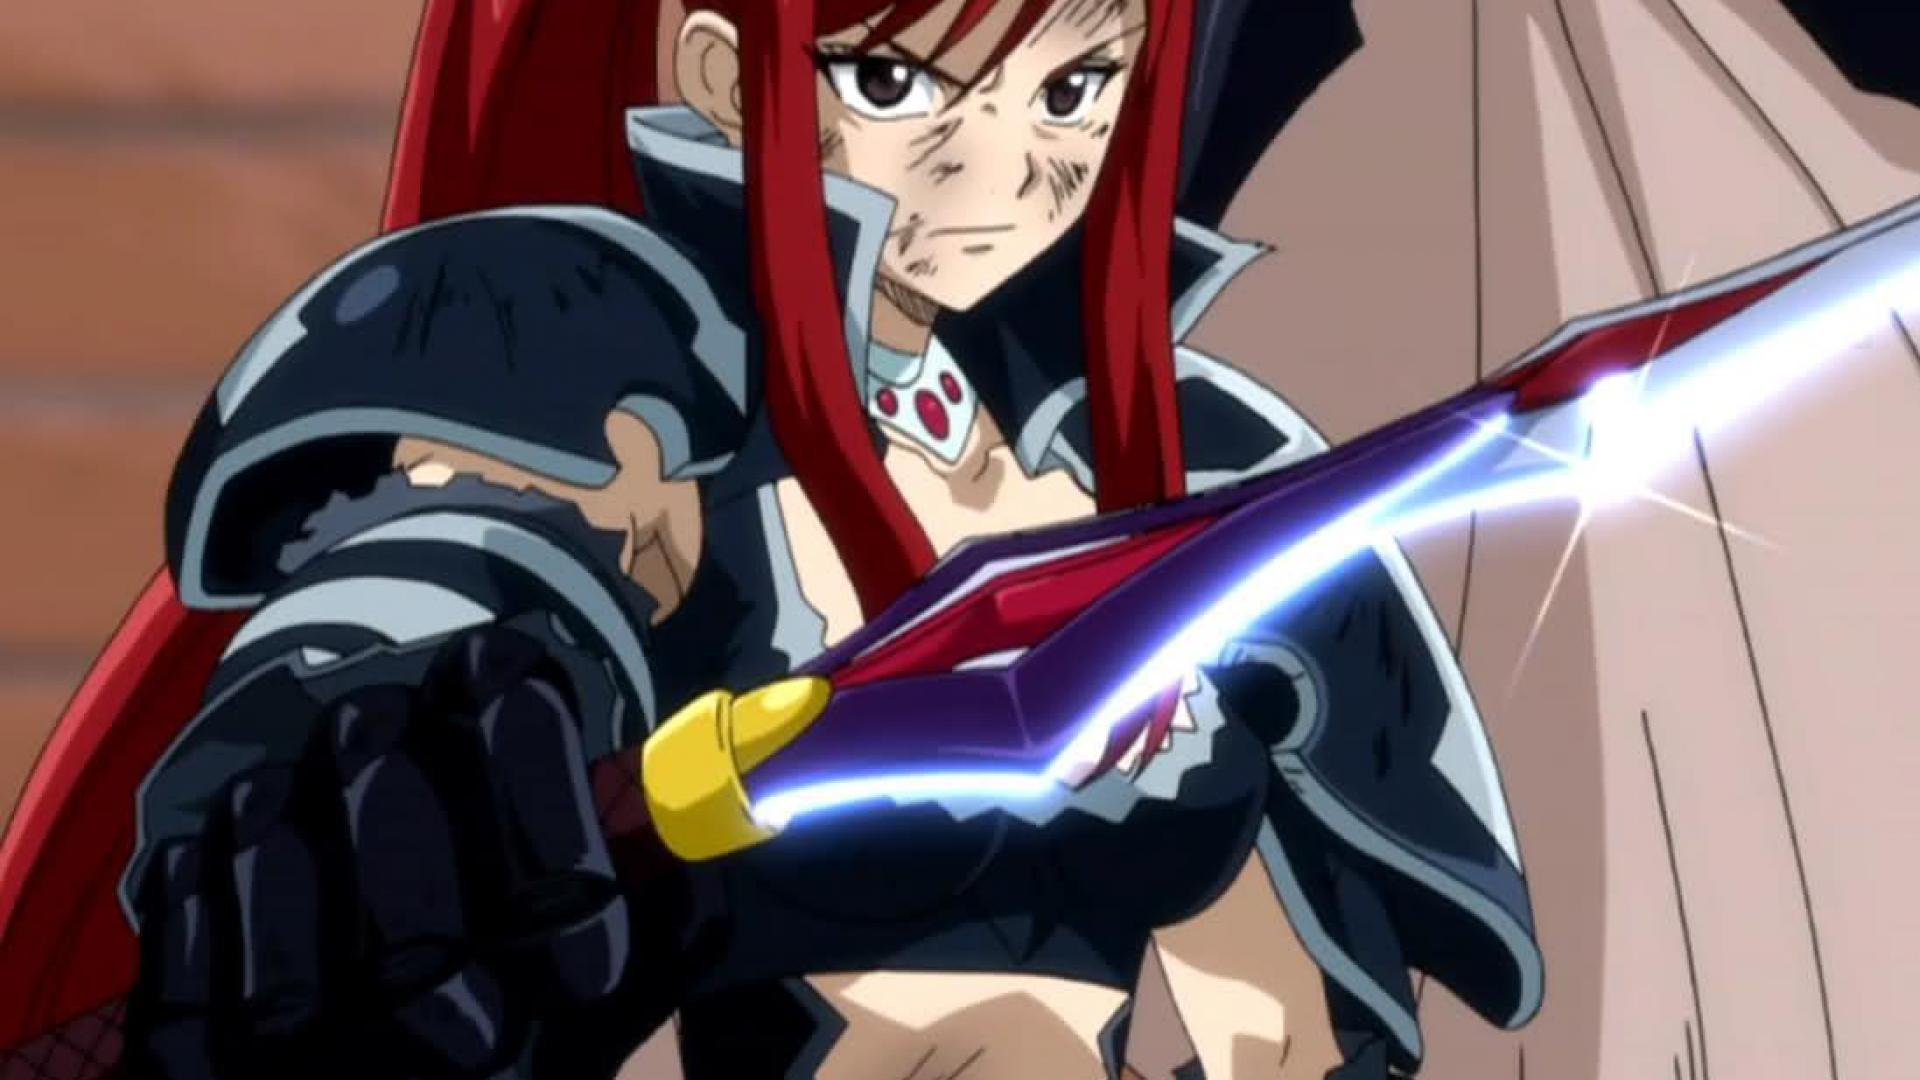 Erza scarlet   132199   High Quality and Resolution Wallpapers on